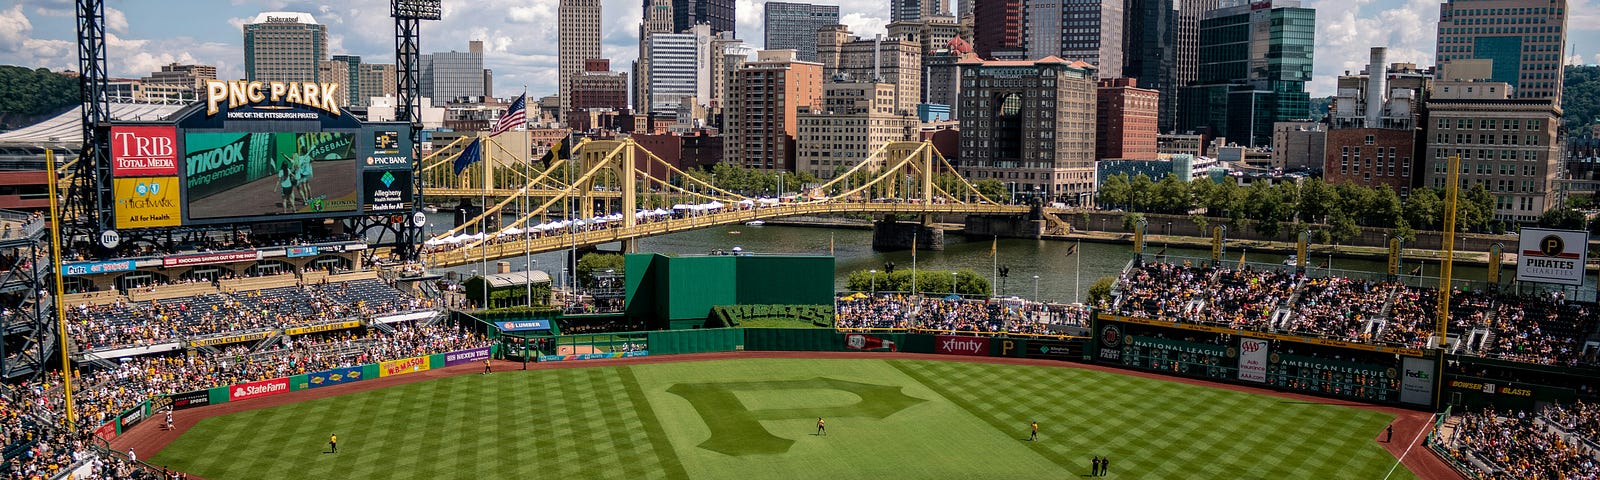 Photo of PNC Park and the Pittsburgh Skyline from high behind home plate.